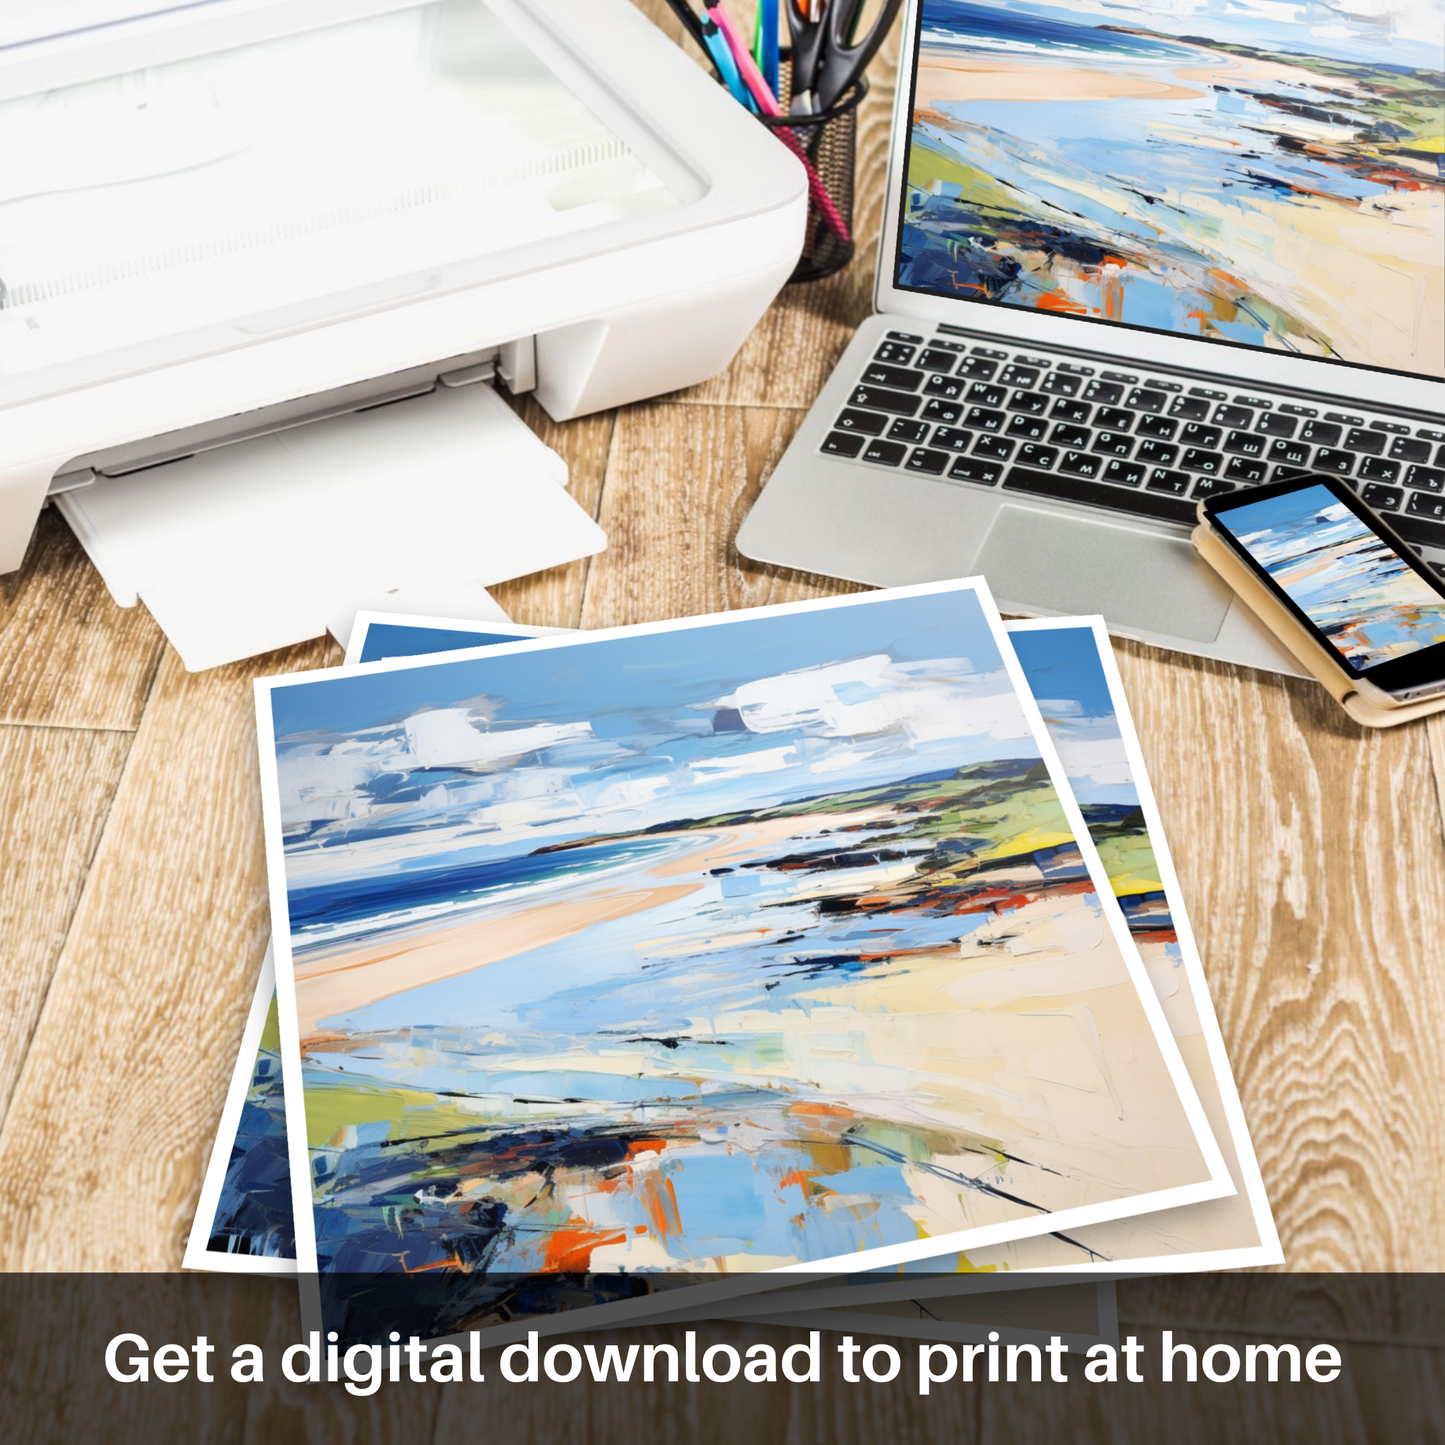 Downloadable and printable picture of West Sands, St Andrews